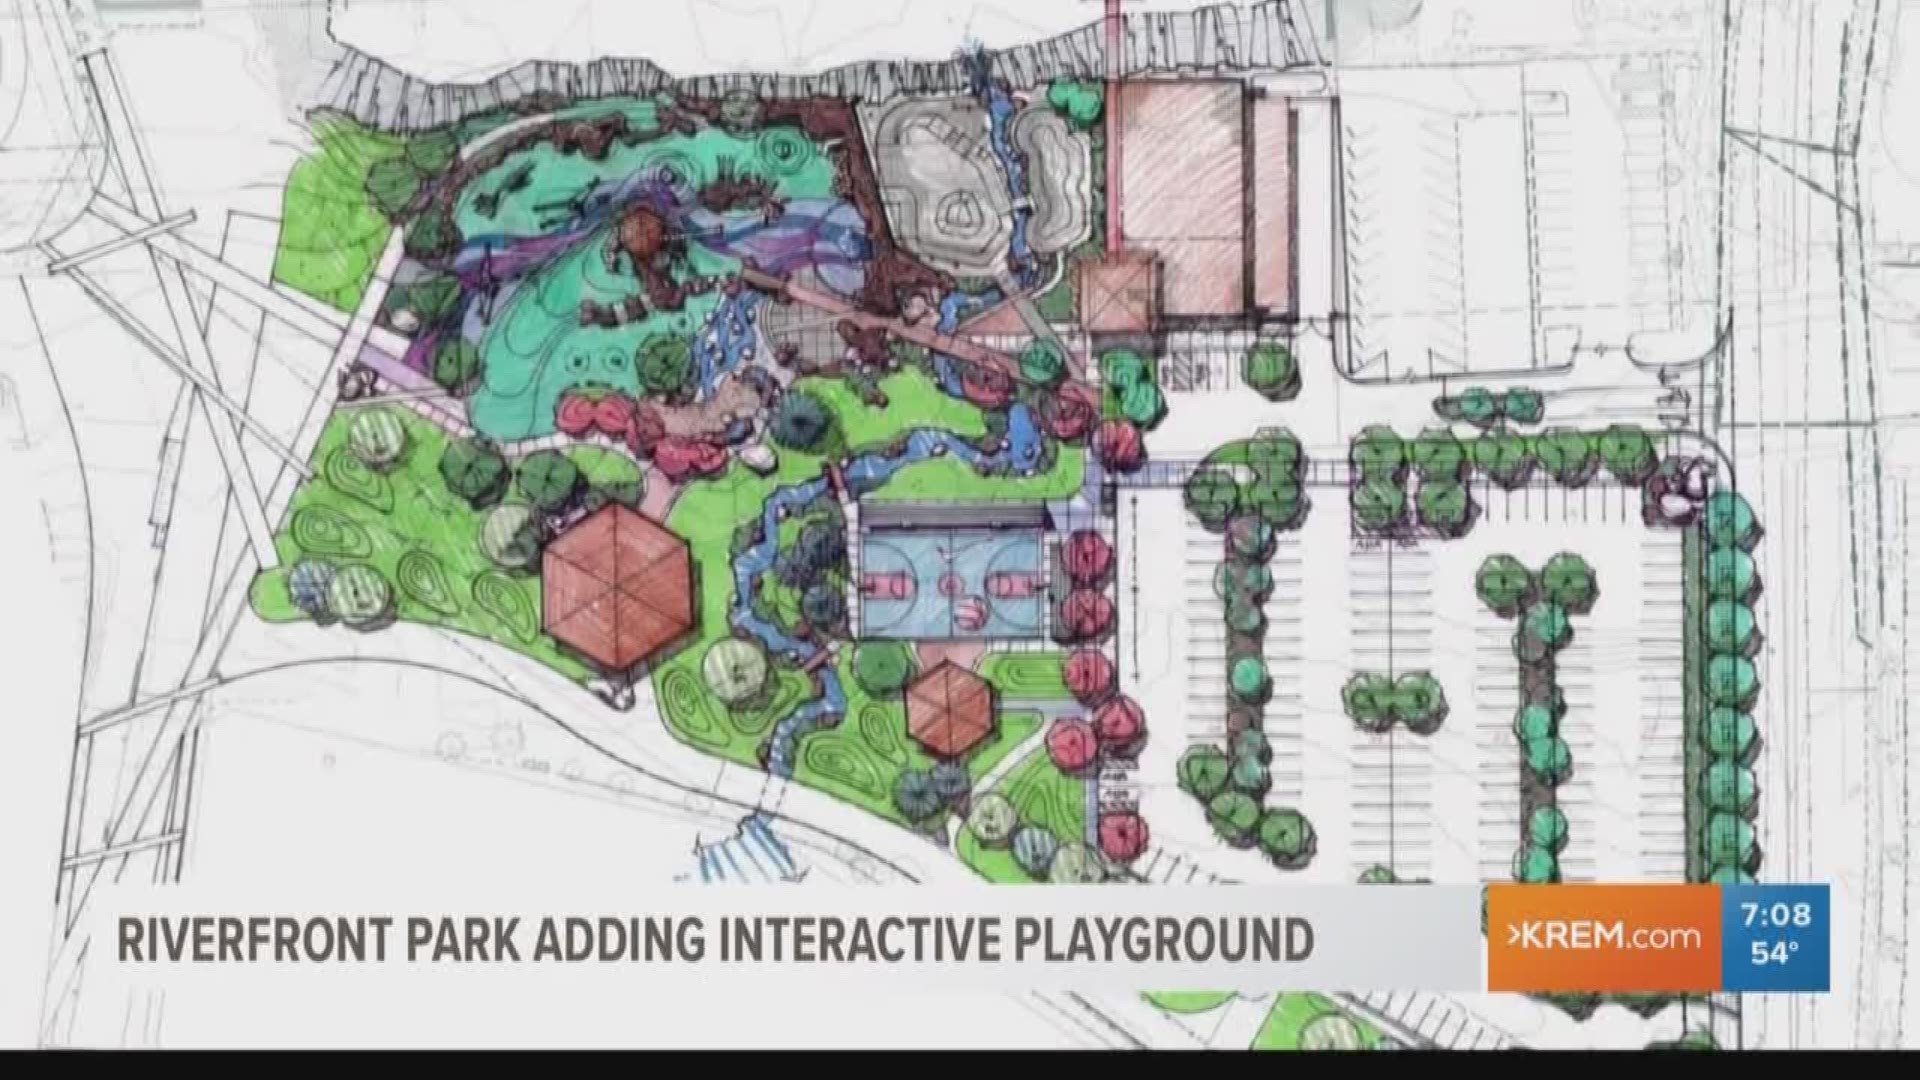 By late summer or early fall of 2020, Riverfront Park will have an interactive playground that will be almost an acre in size.